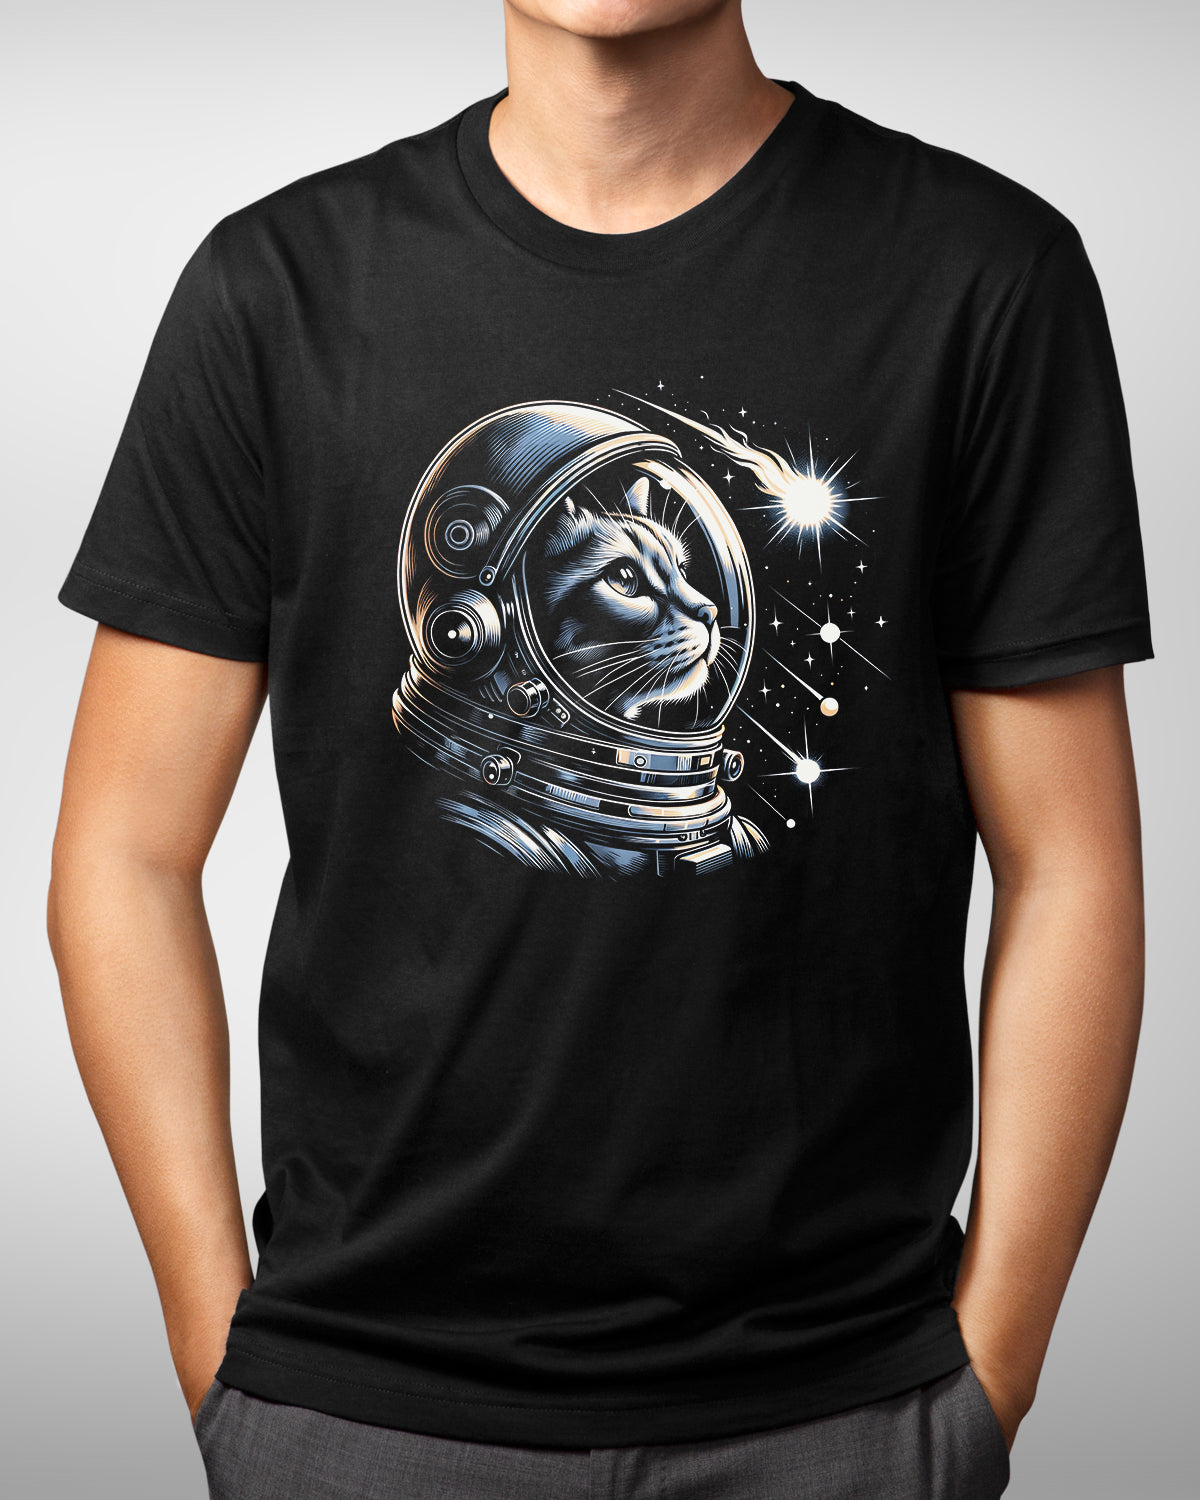 Space Cat Astronaut Shirt, Outer Space Tee, Cool Galaxy Kitty, Sci-Fi Astronomy Lover T-Shirt, Animal in Space